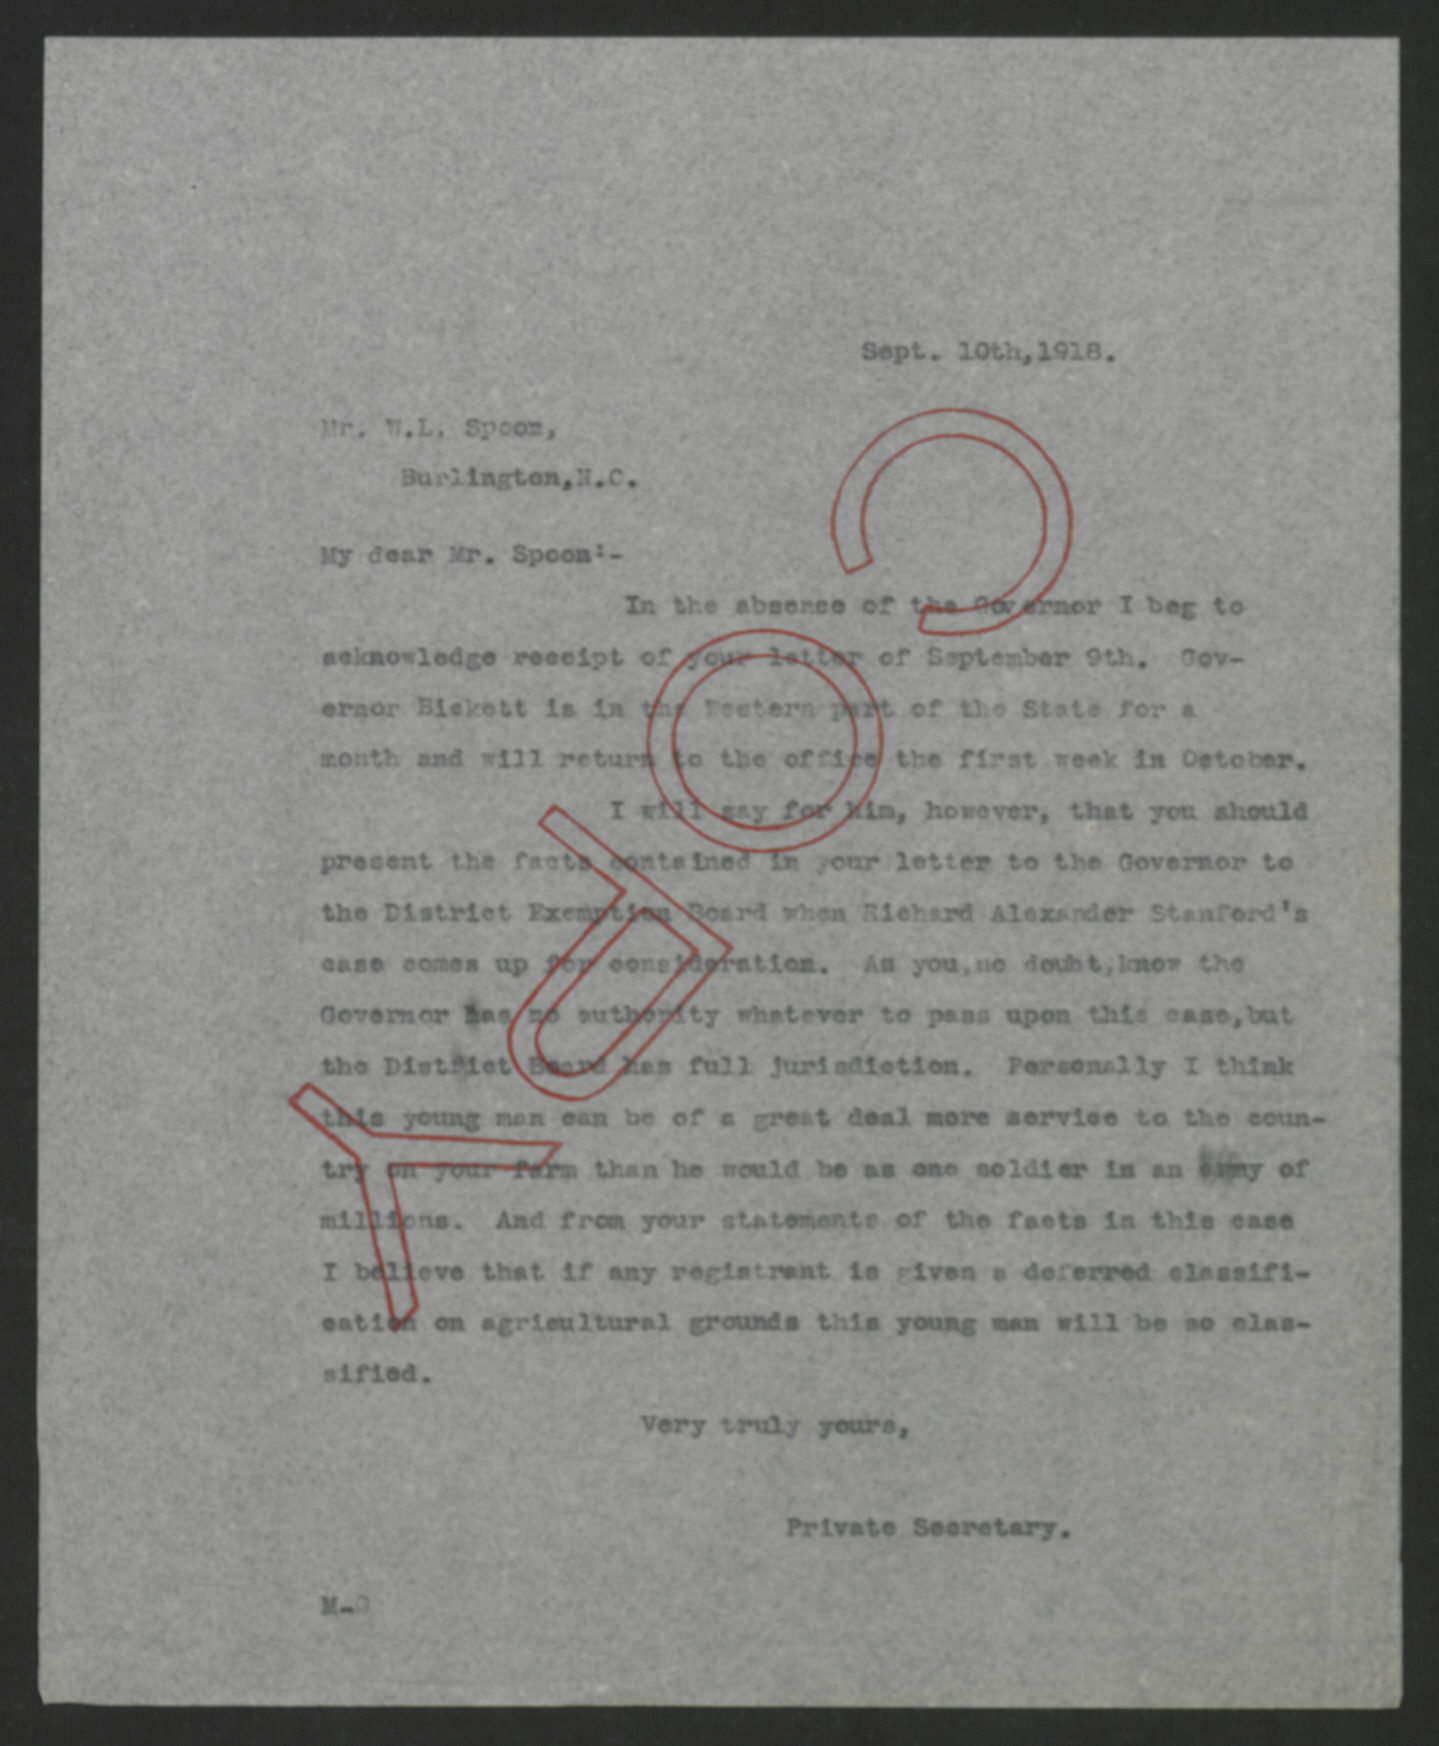 Letter from Santford Martin to William L. Spoon, September 10, 1918